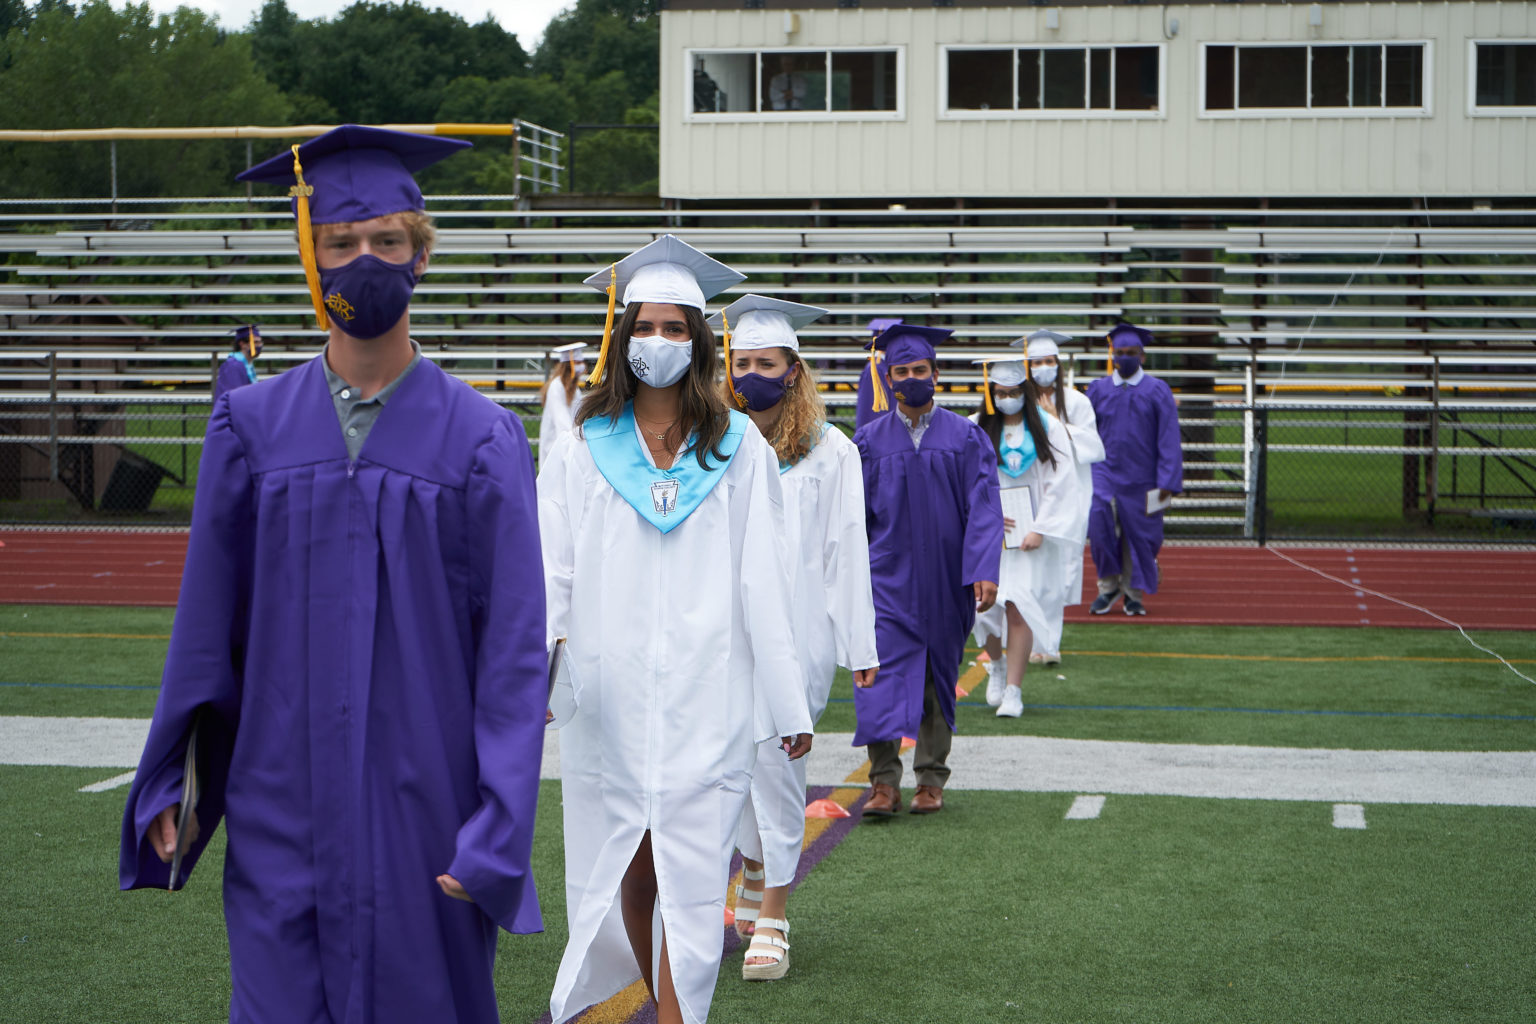 2020 cba graduation image of graduates walking in caps and gowns and masks